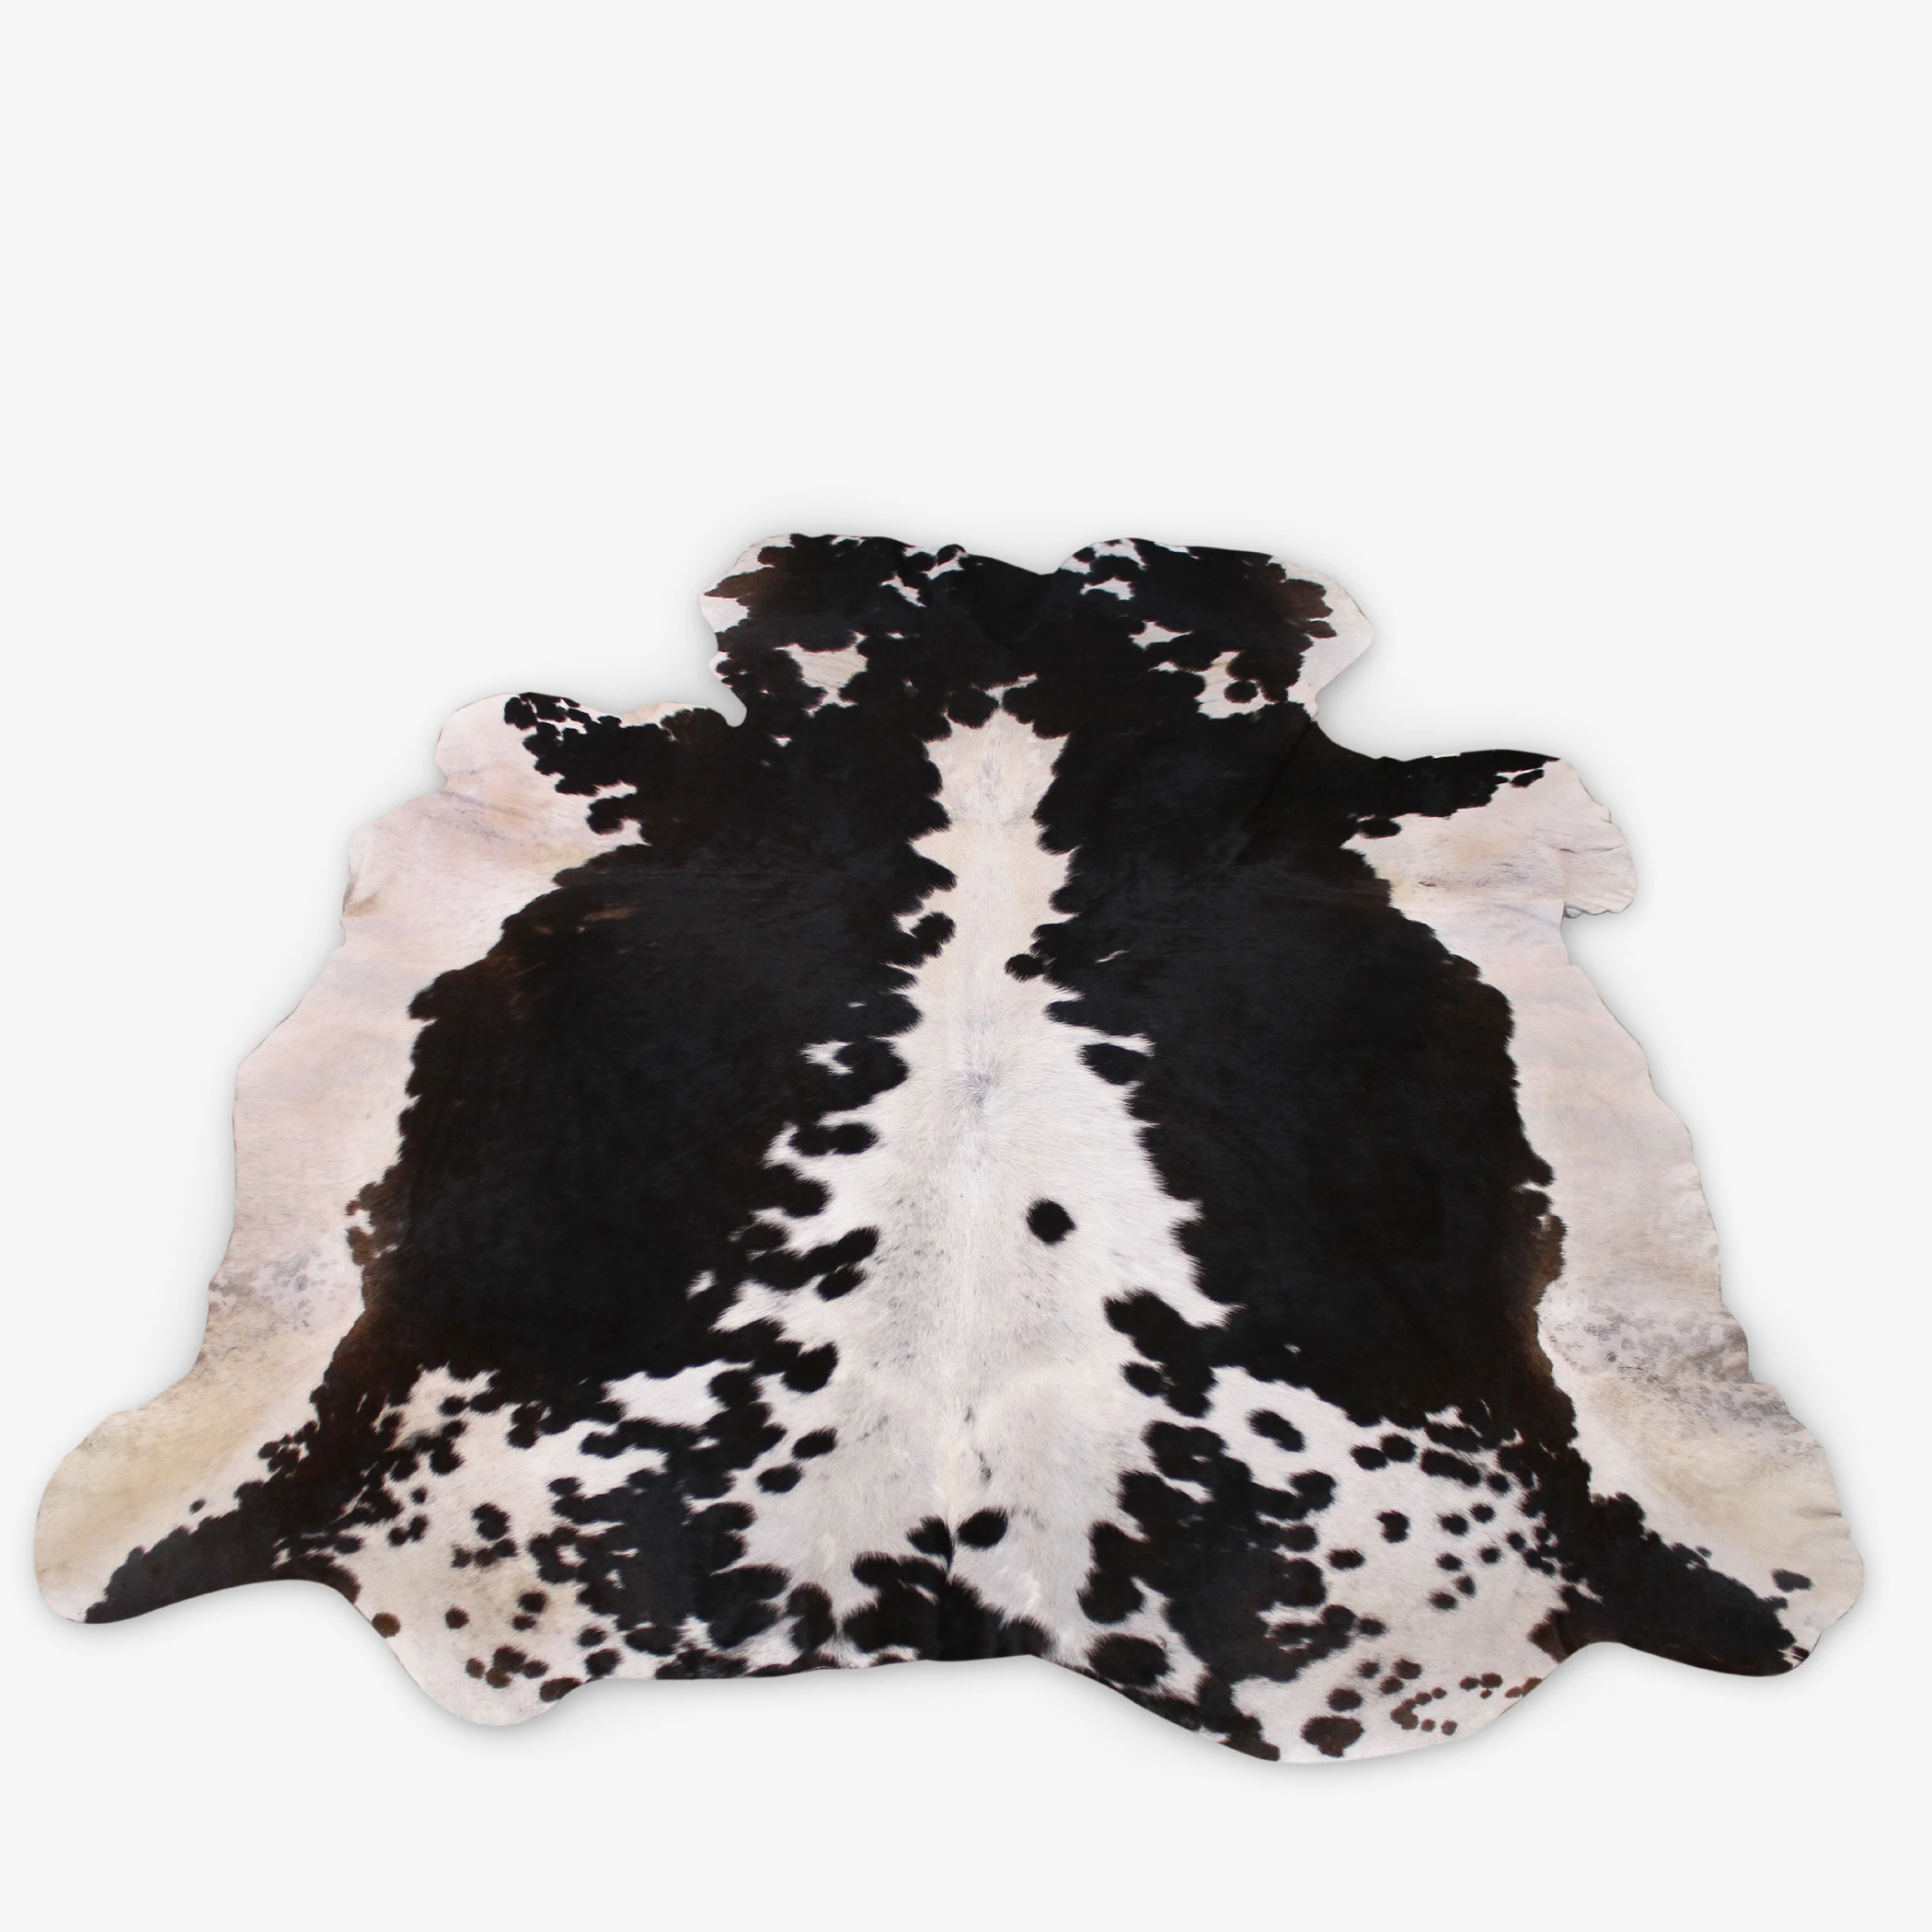 Details about   COWHIDE LEATHER RUGS 100% Real TRICOLOR COW HIDE SKIN CARPET AREA 12-35 SQFT 